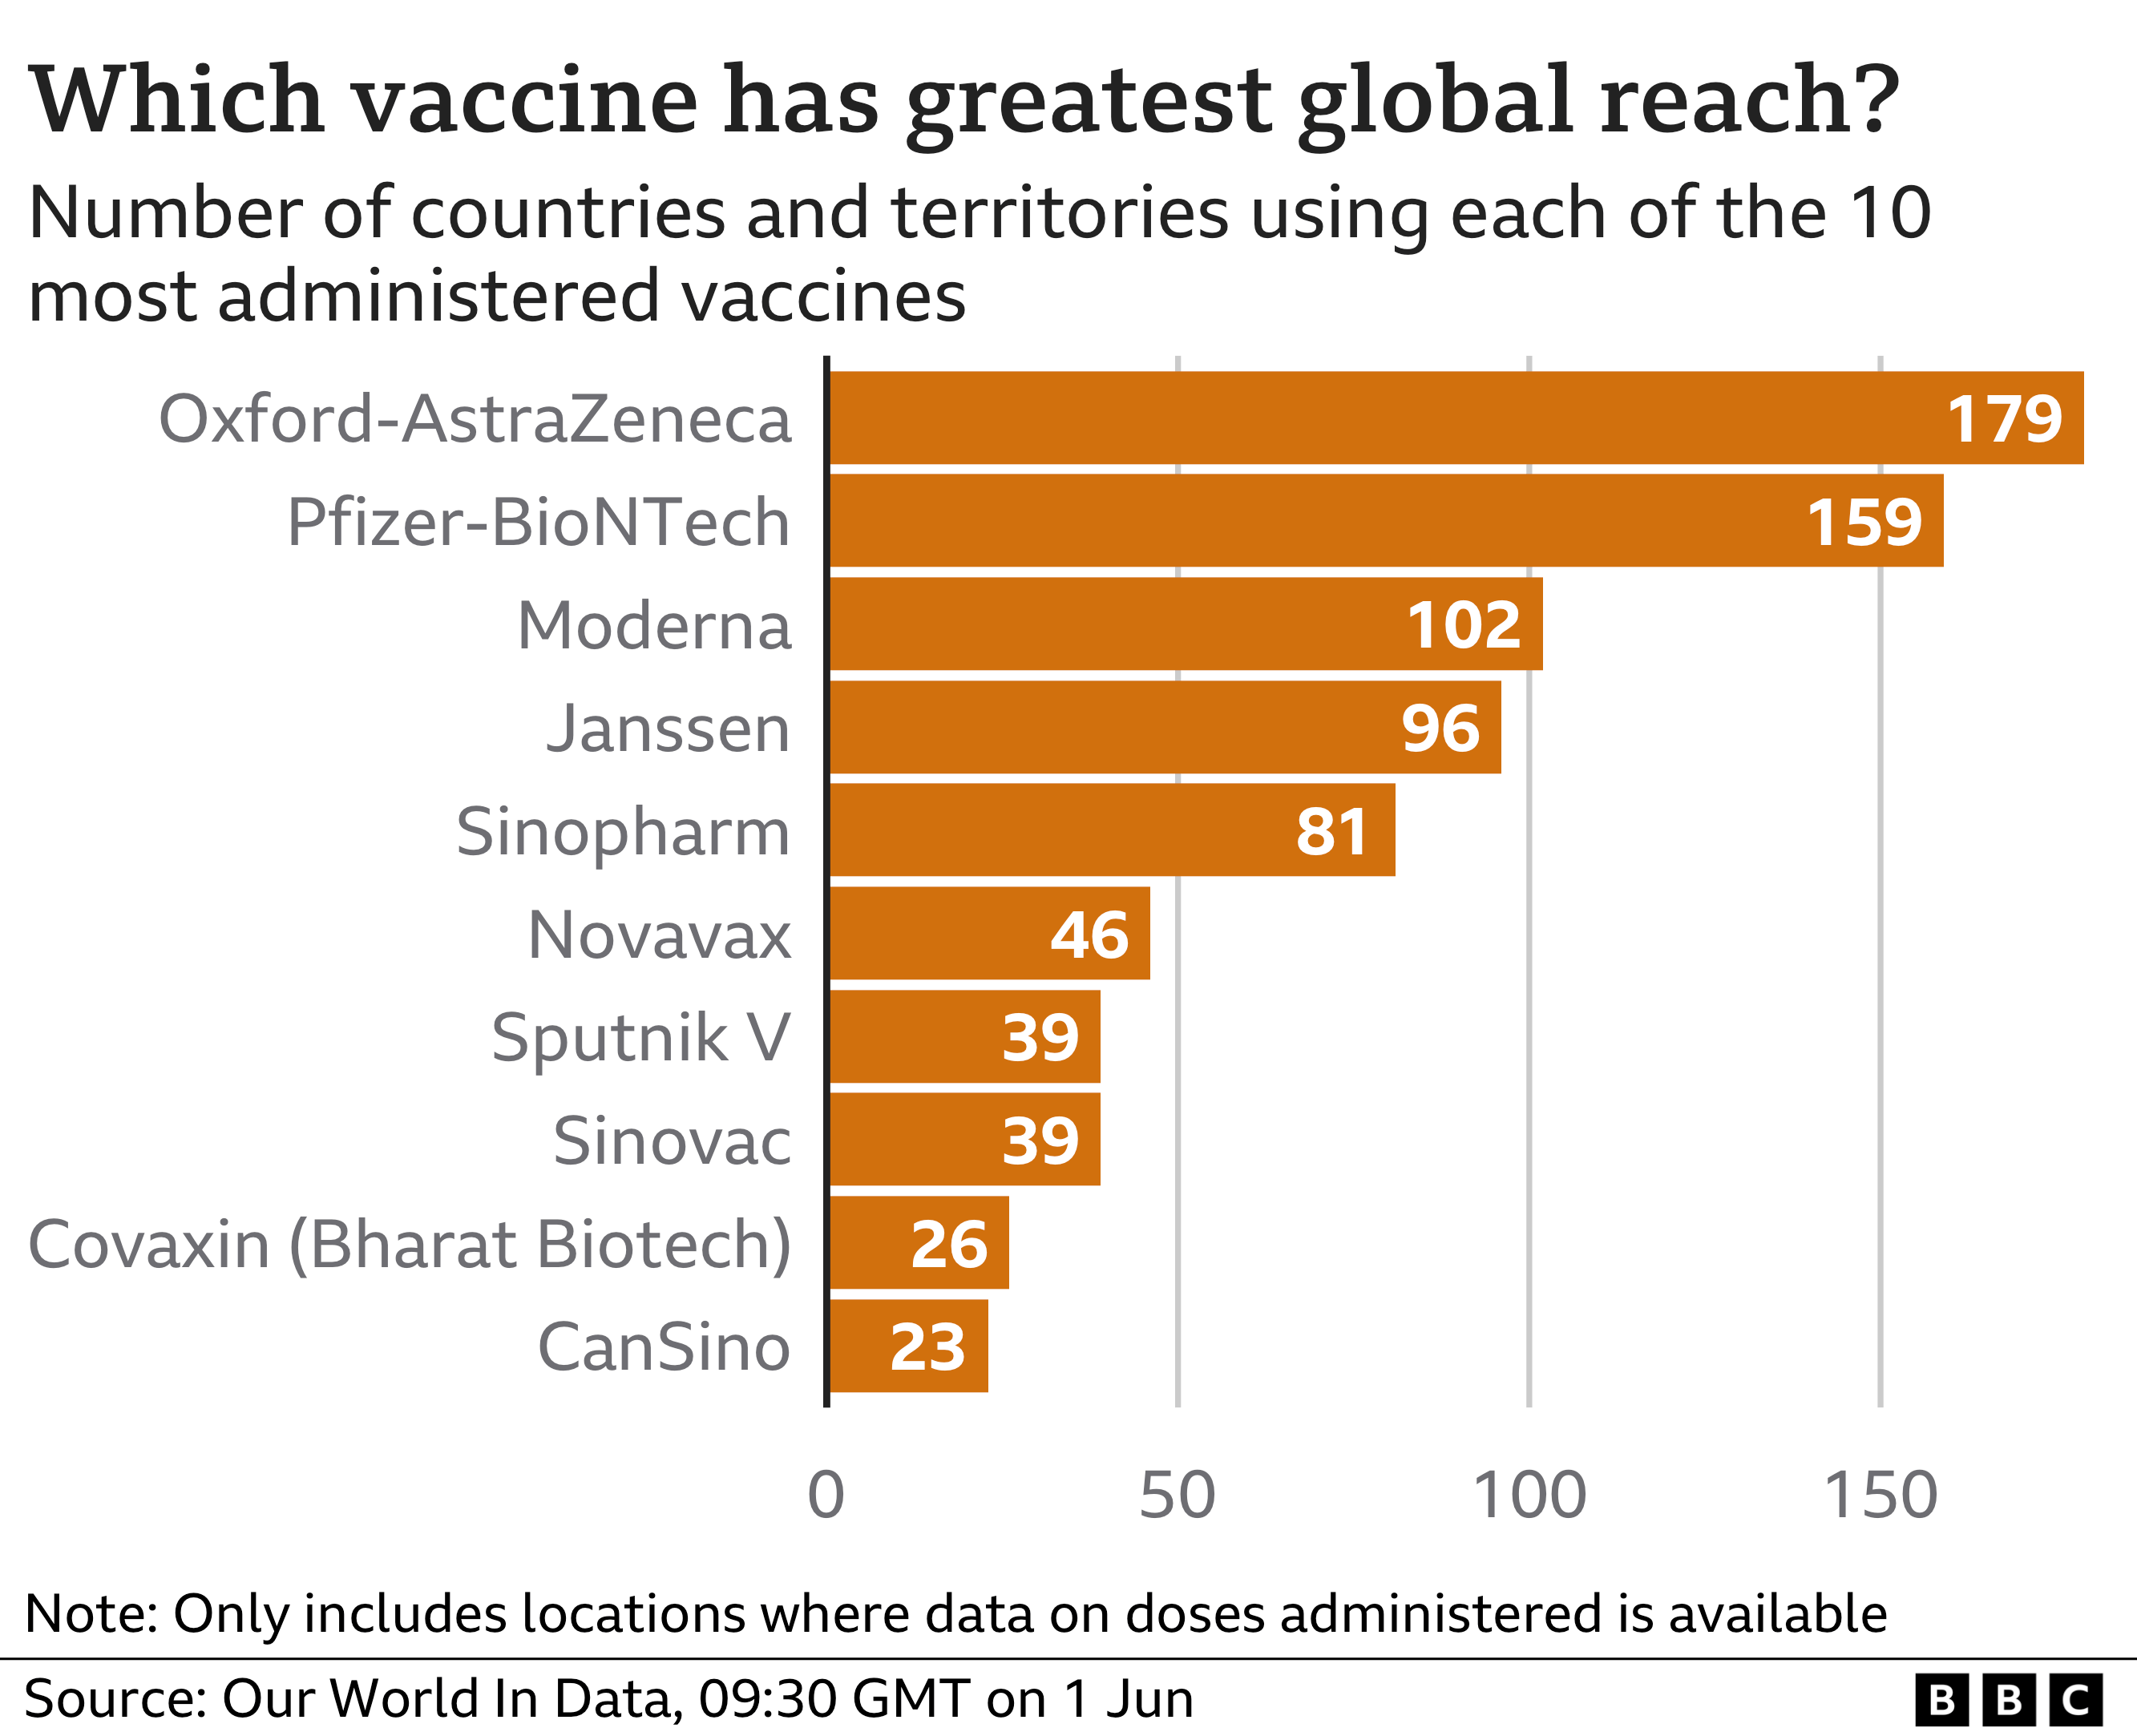 Chart showing the global reach of each type of covid vaccine. Oxford-AstraZenica is at the top